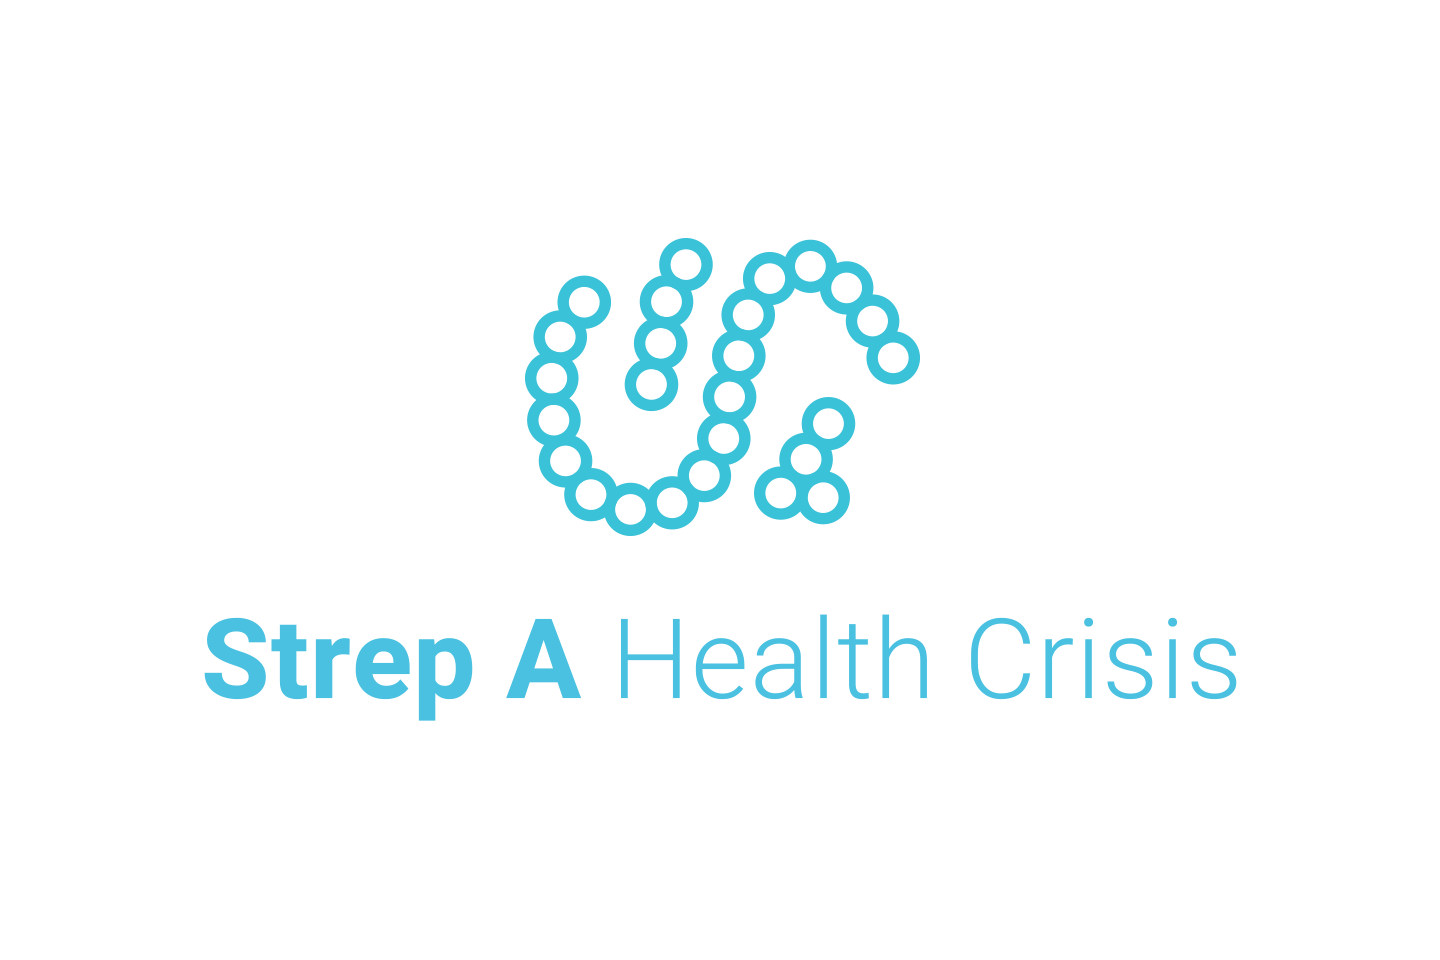 2San Successfully Met a Major Healthcare Crisis With Launch of Self Diagnostic Strep A Test